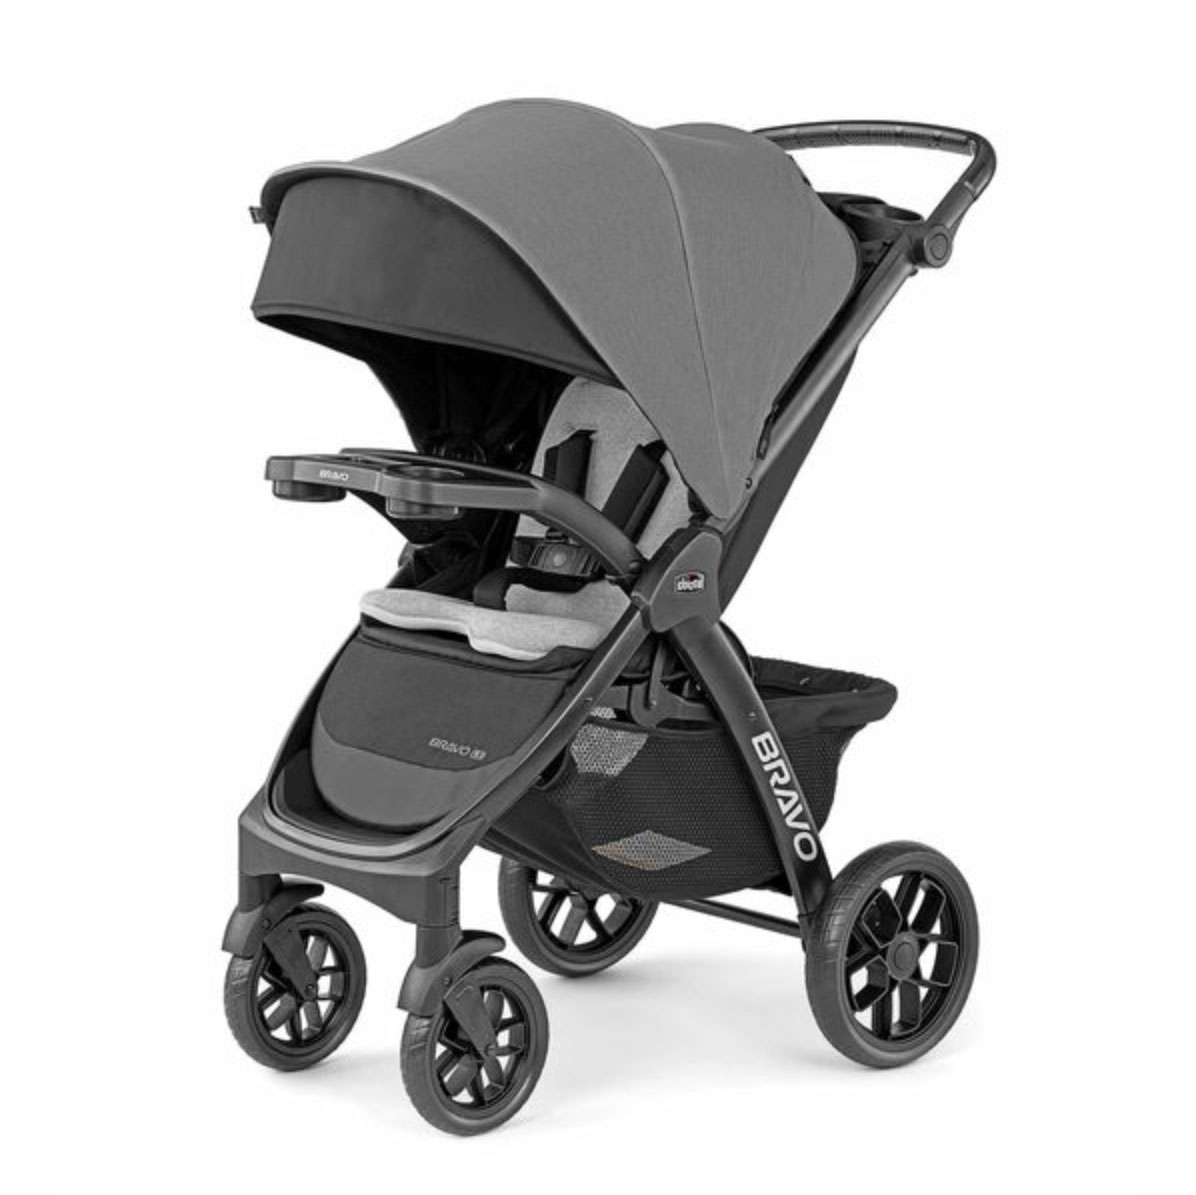 Grey stroller with canopy